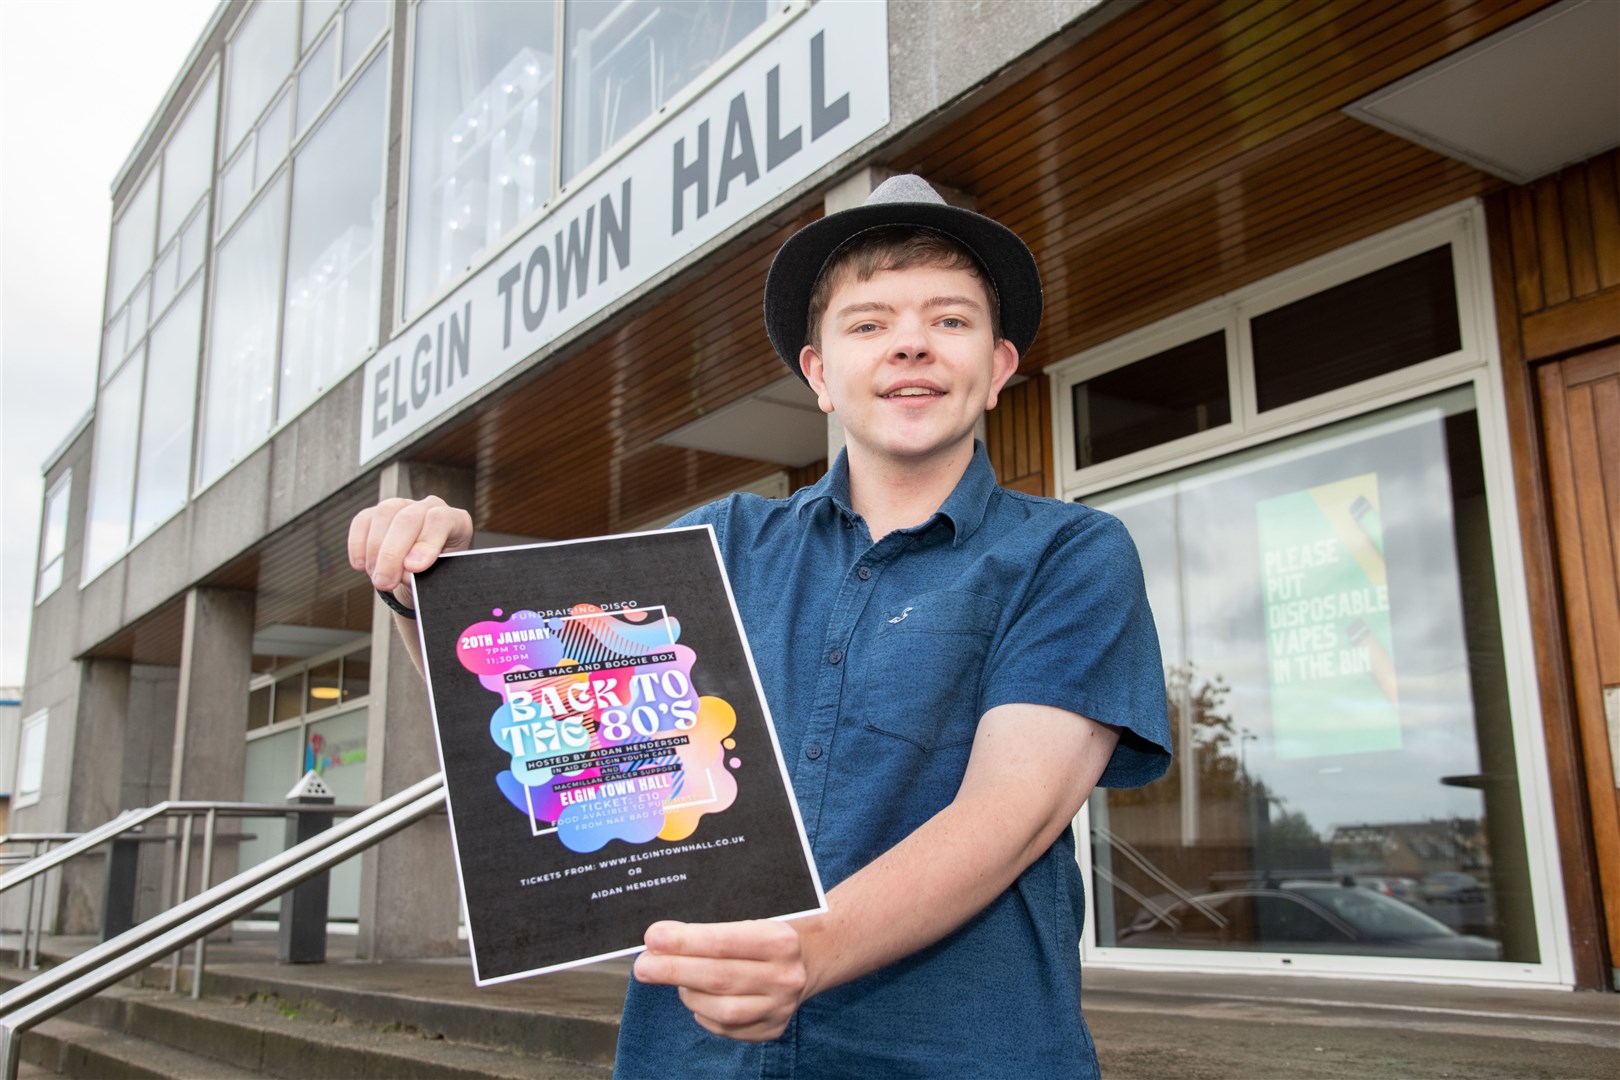 Aidan Henderson is organising a 'Back to the 80's' disco at the Elgin Town Hall in January. The event is raising money for Elgin Youth Cafe and MacMillan Cancer Support...Picture: Daniel Forsyth..